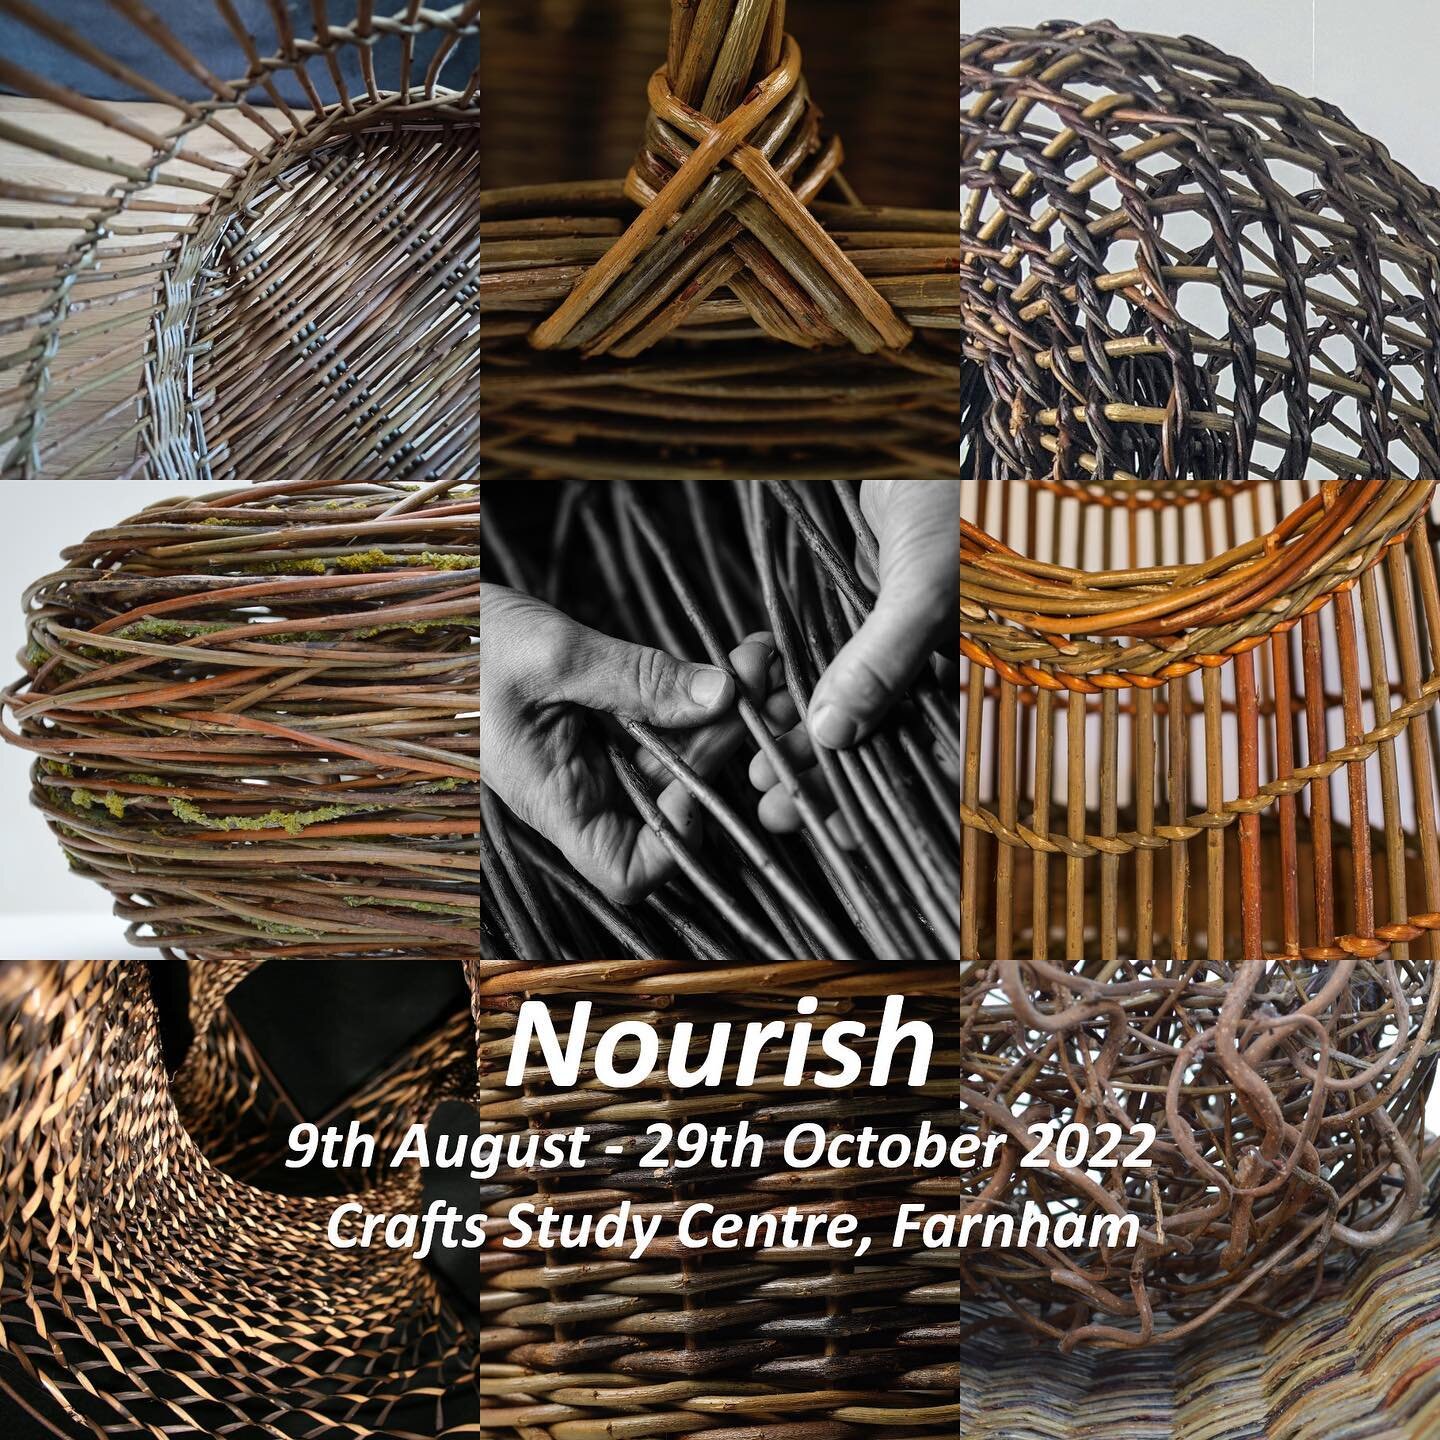 Starting tomorrow! I&rsquo;m so proud to be part of this talented and committed group of basketmakers 🤩many of whom are doing a LOT of work behind the scenes which I am hugely grateful for. I&rsquo;m going to meet many of you in person at last come 